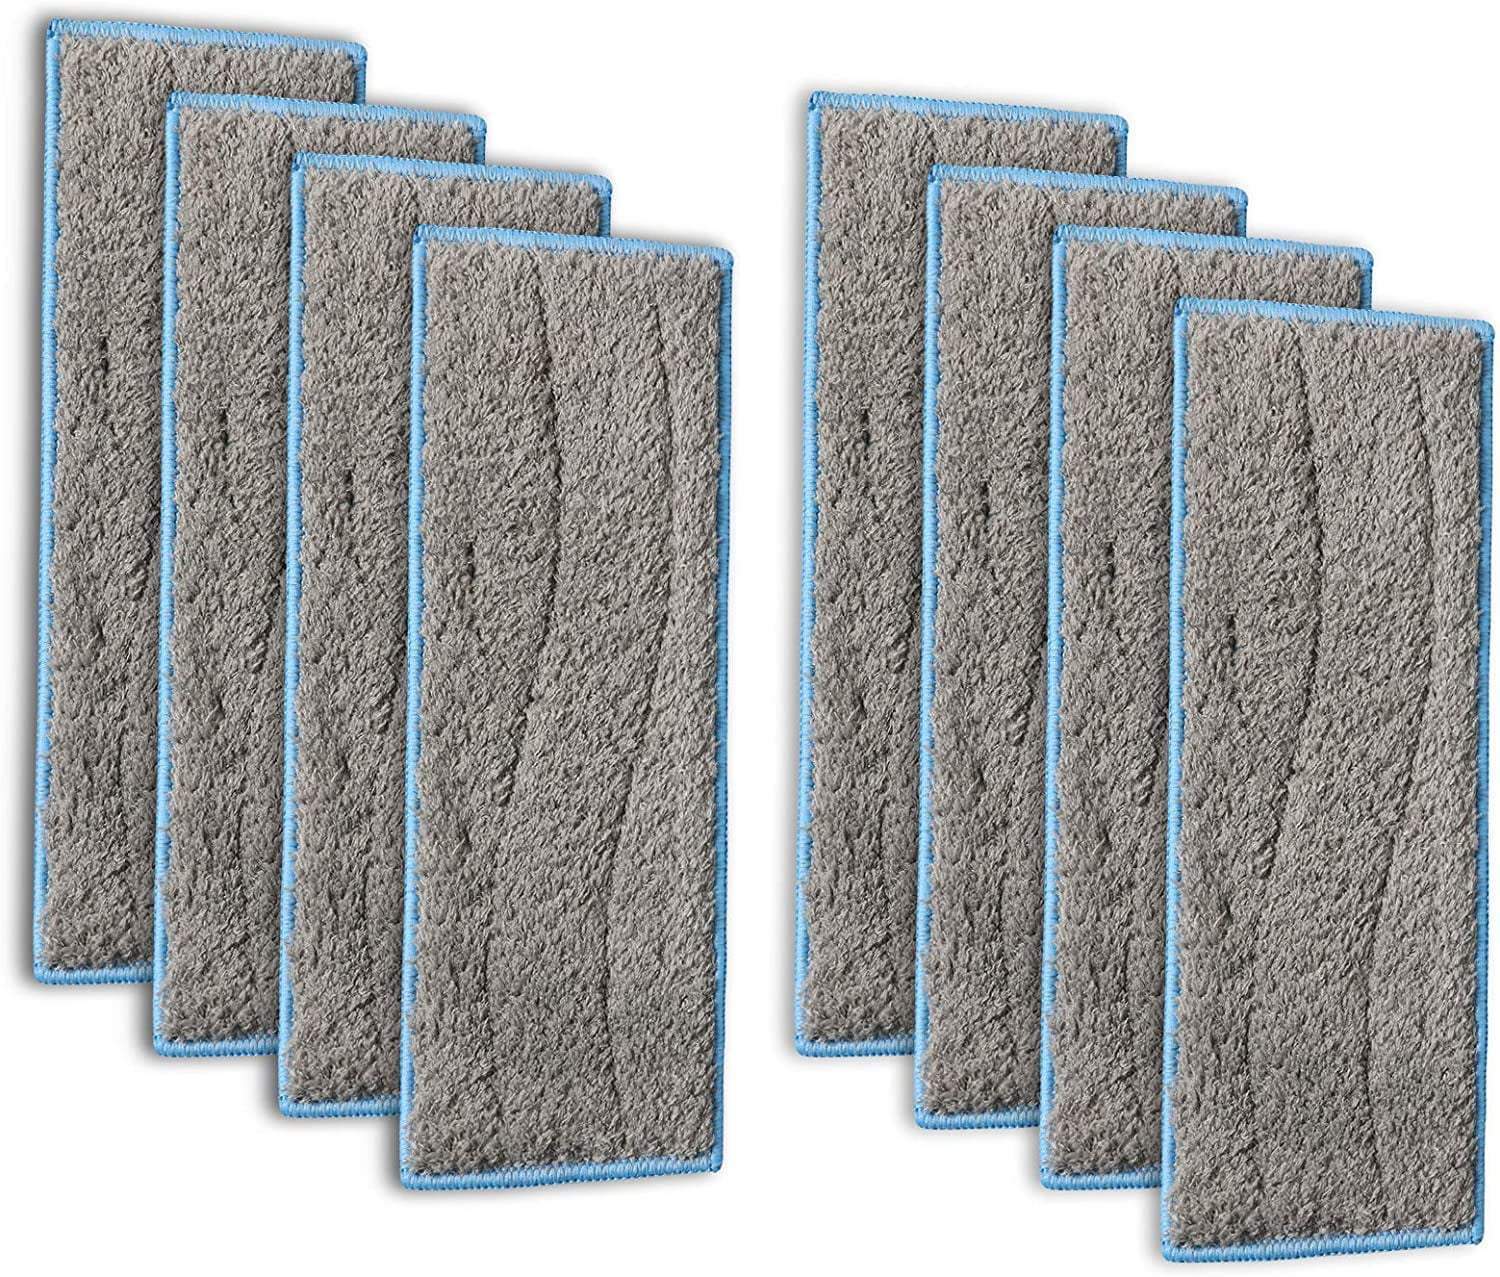 6110 Wet Pads for iRobot Braava Jet M6 Gazeer 8pcs Braava Jet m6 Washable and Reusable Wet Mopping Pads Compatible Braava Jet m Series 